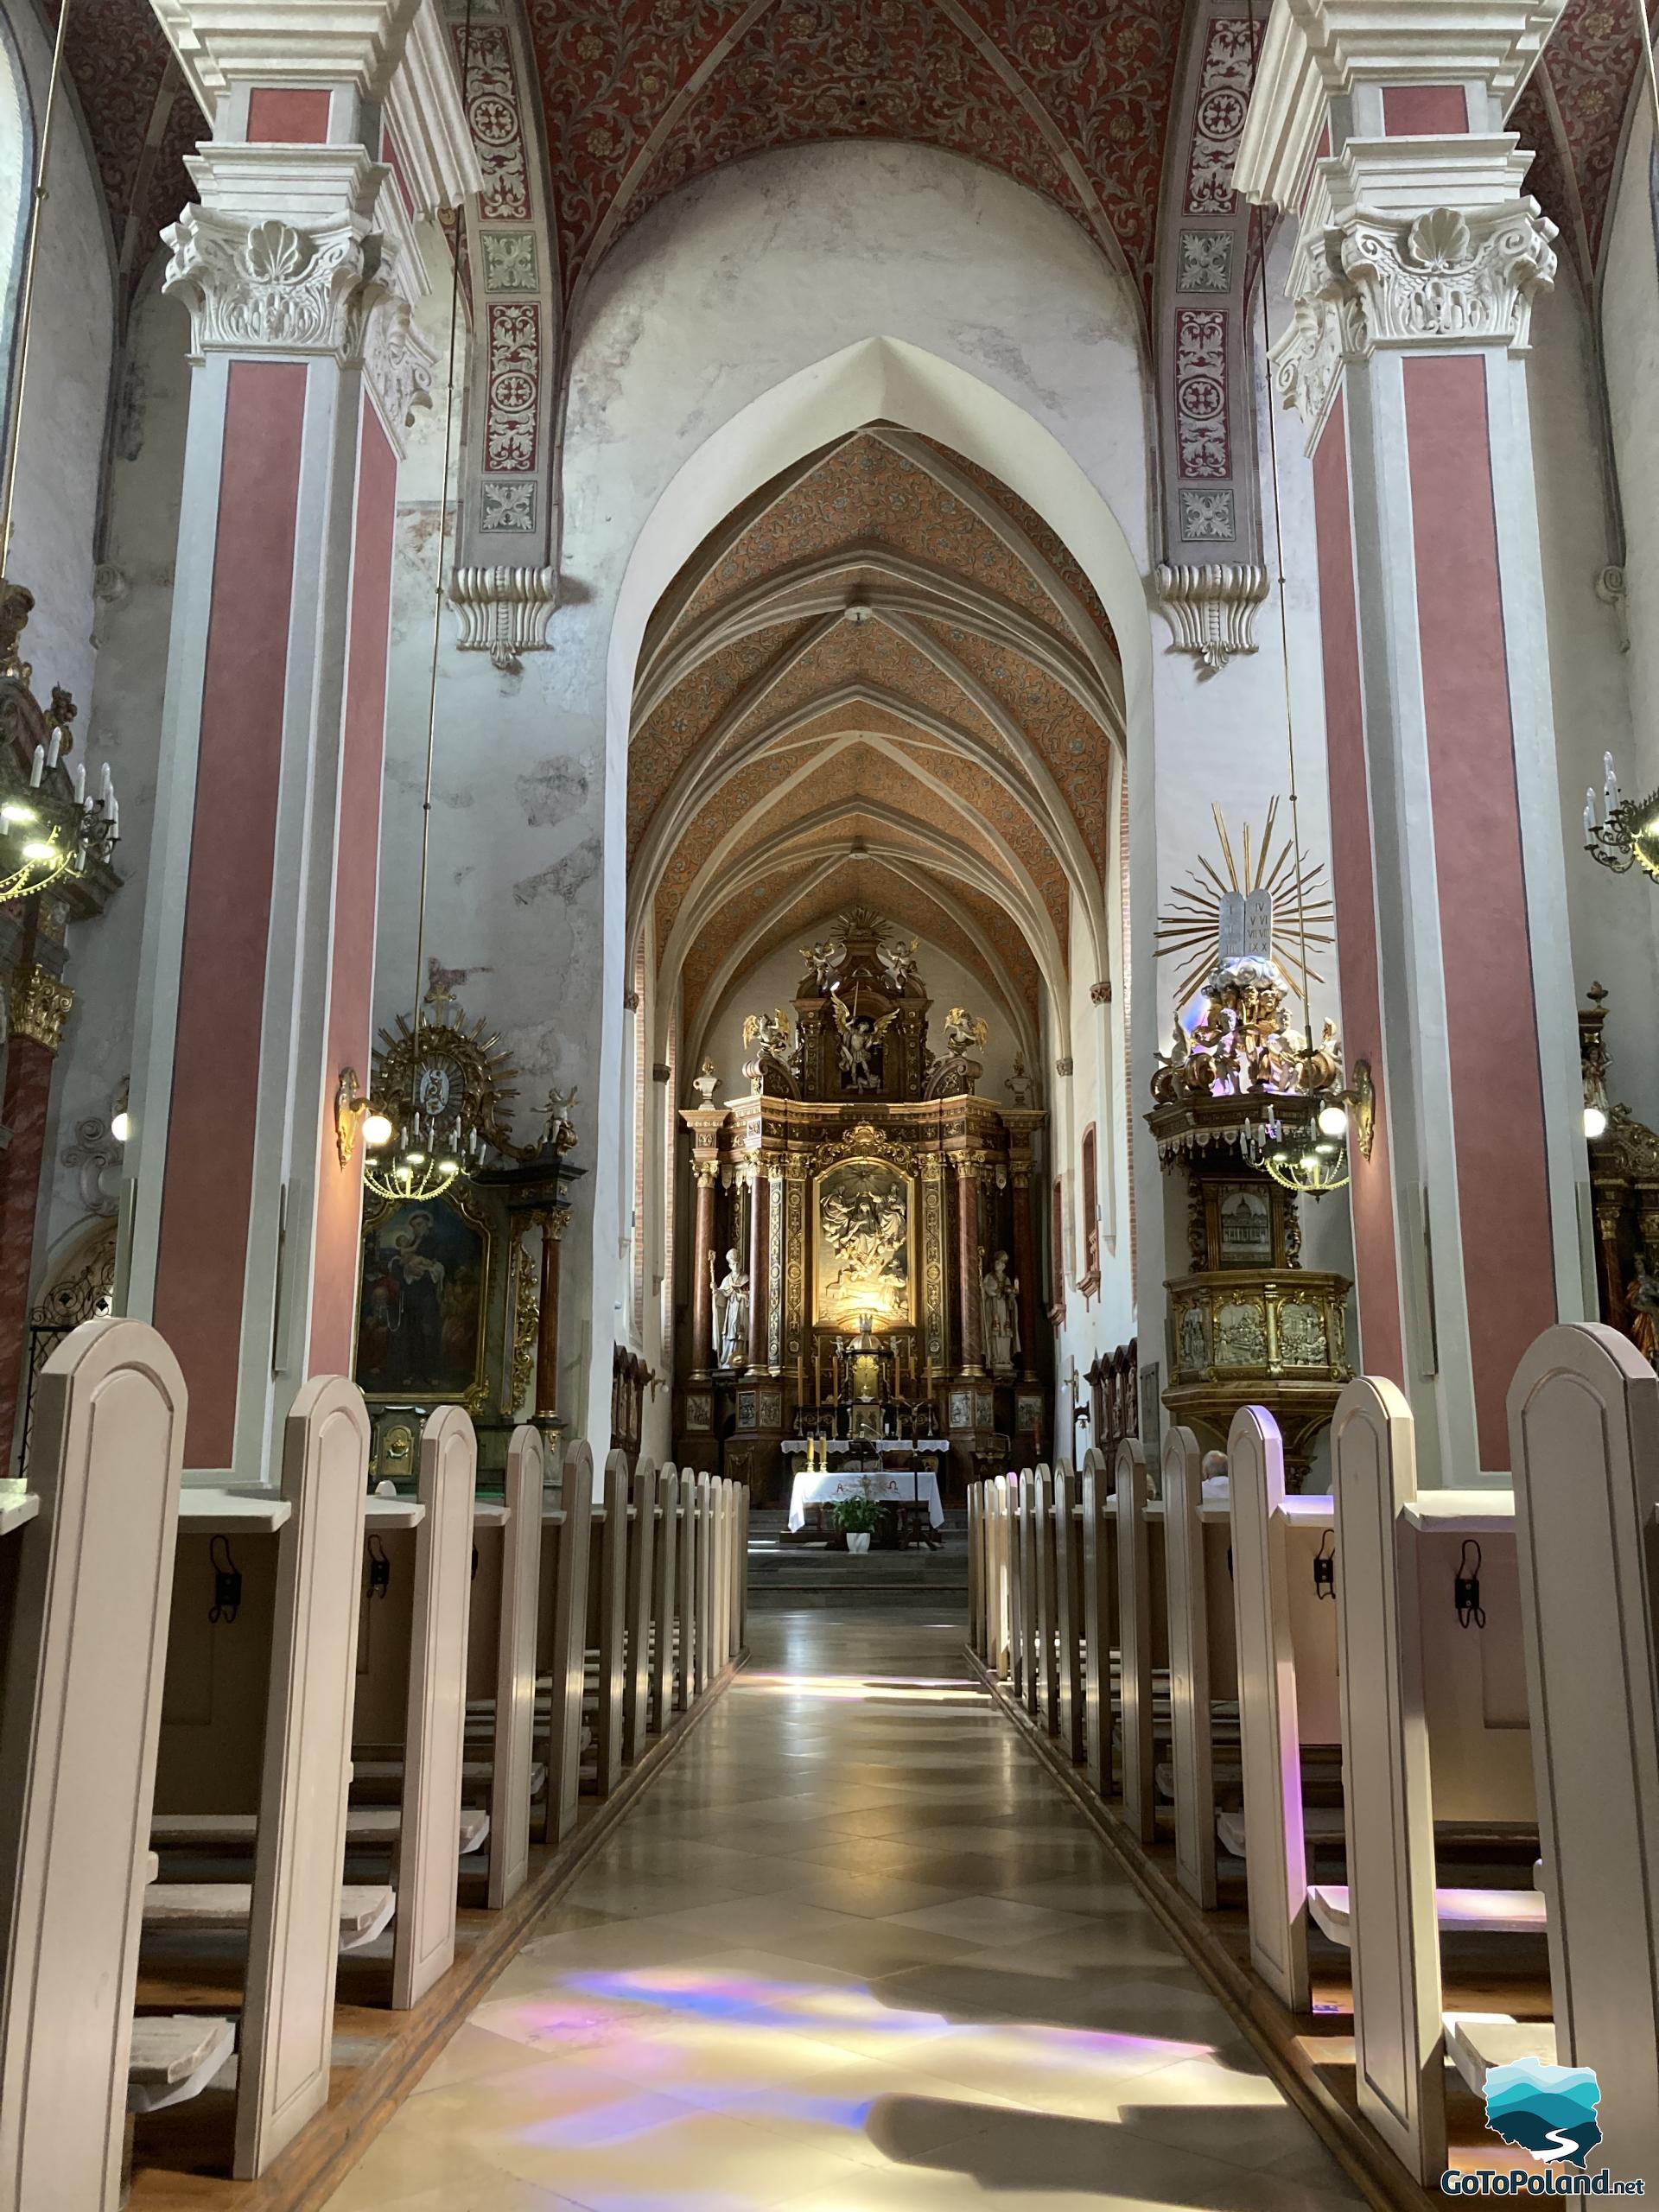 view of the interior of the church with the main altar, side altars and pews